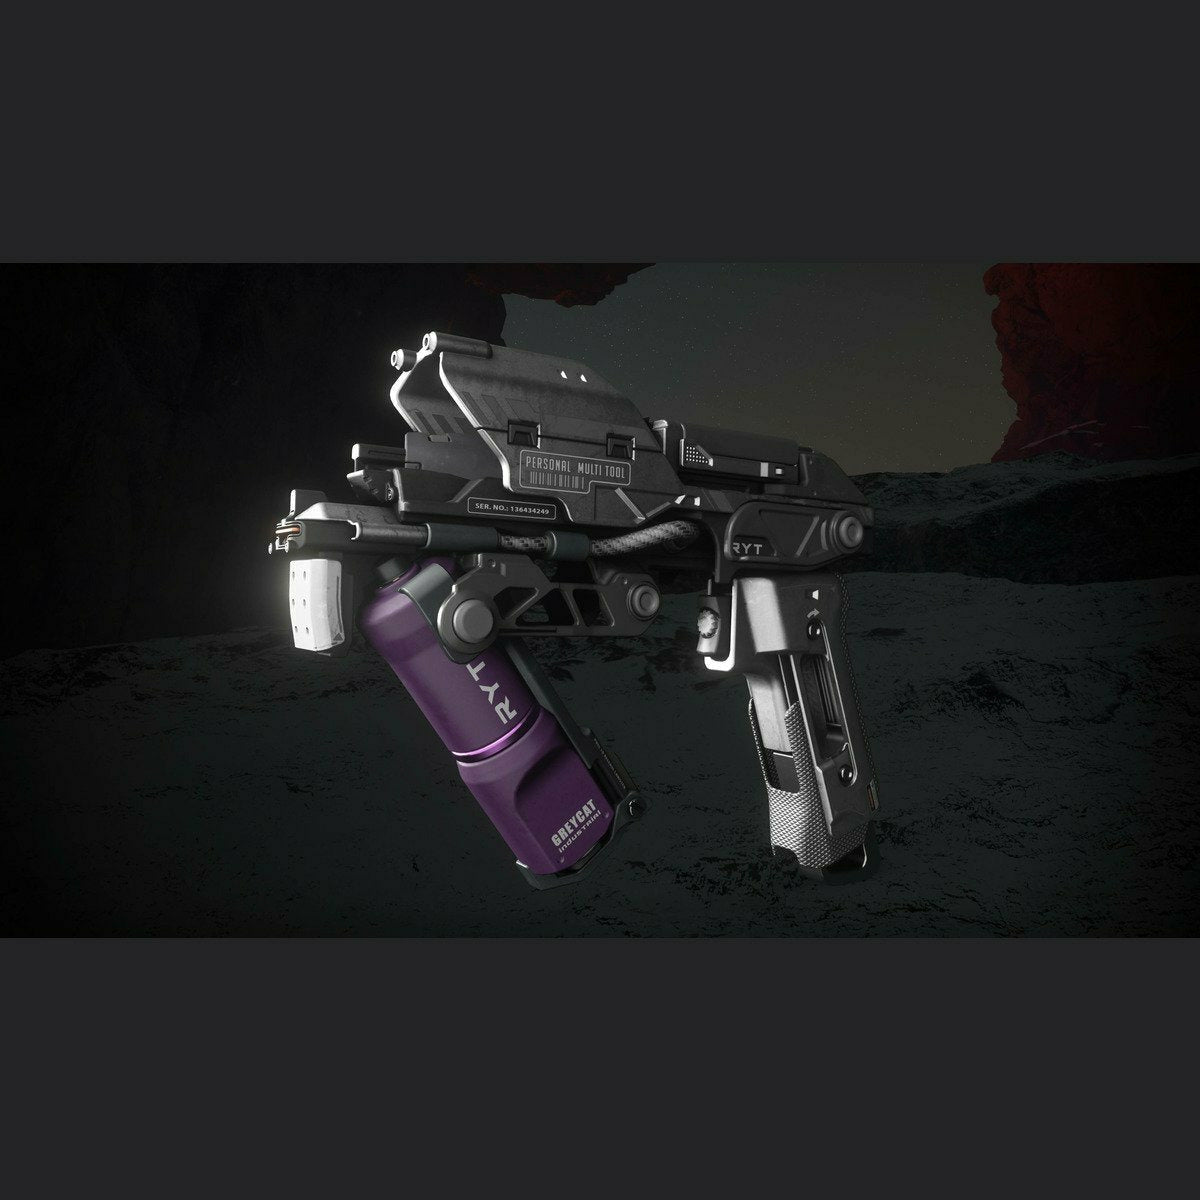 Pyro RYT Quicksilver Multi-Tool | Space Foundry Marketplace.